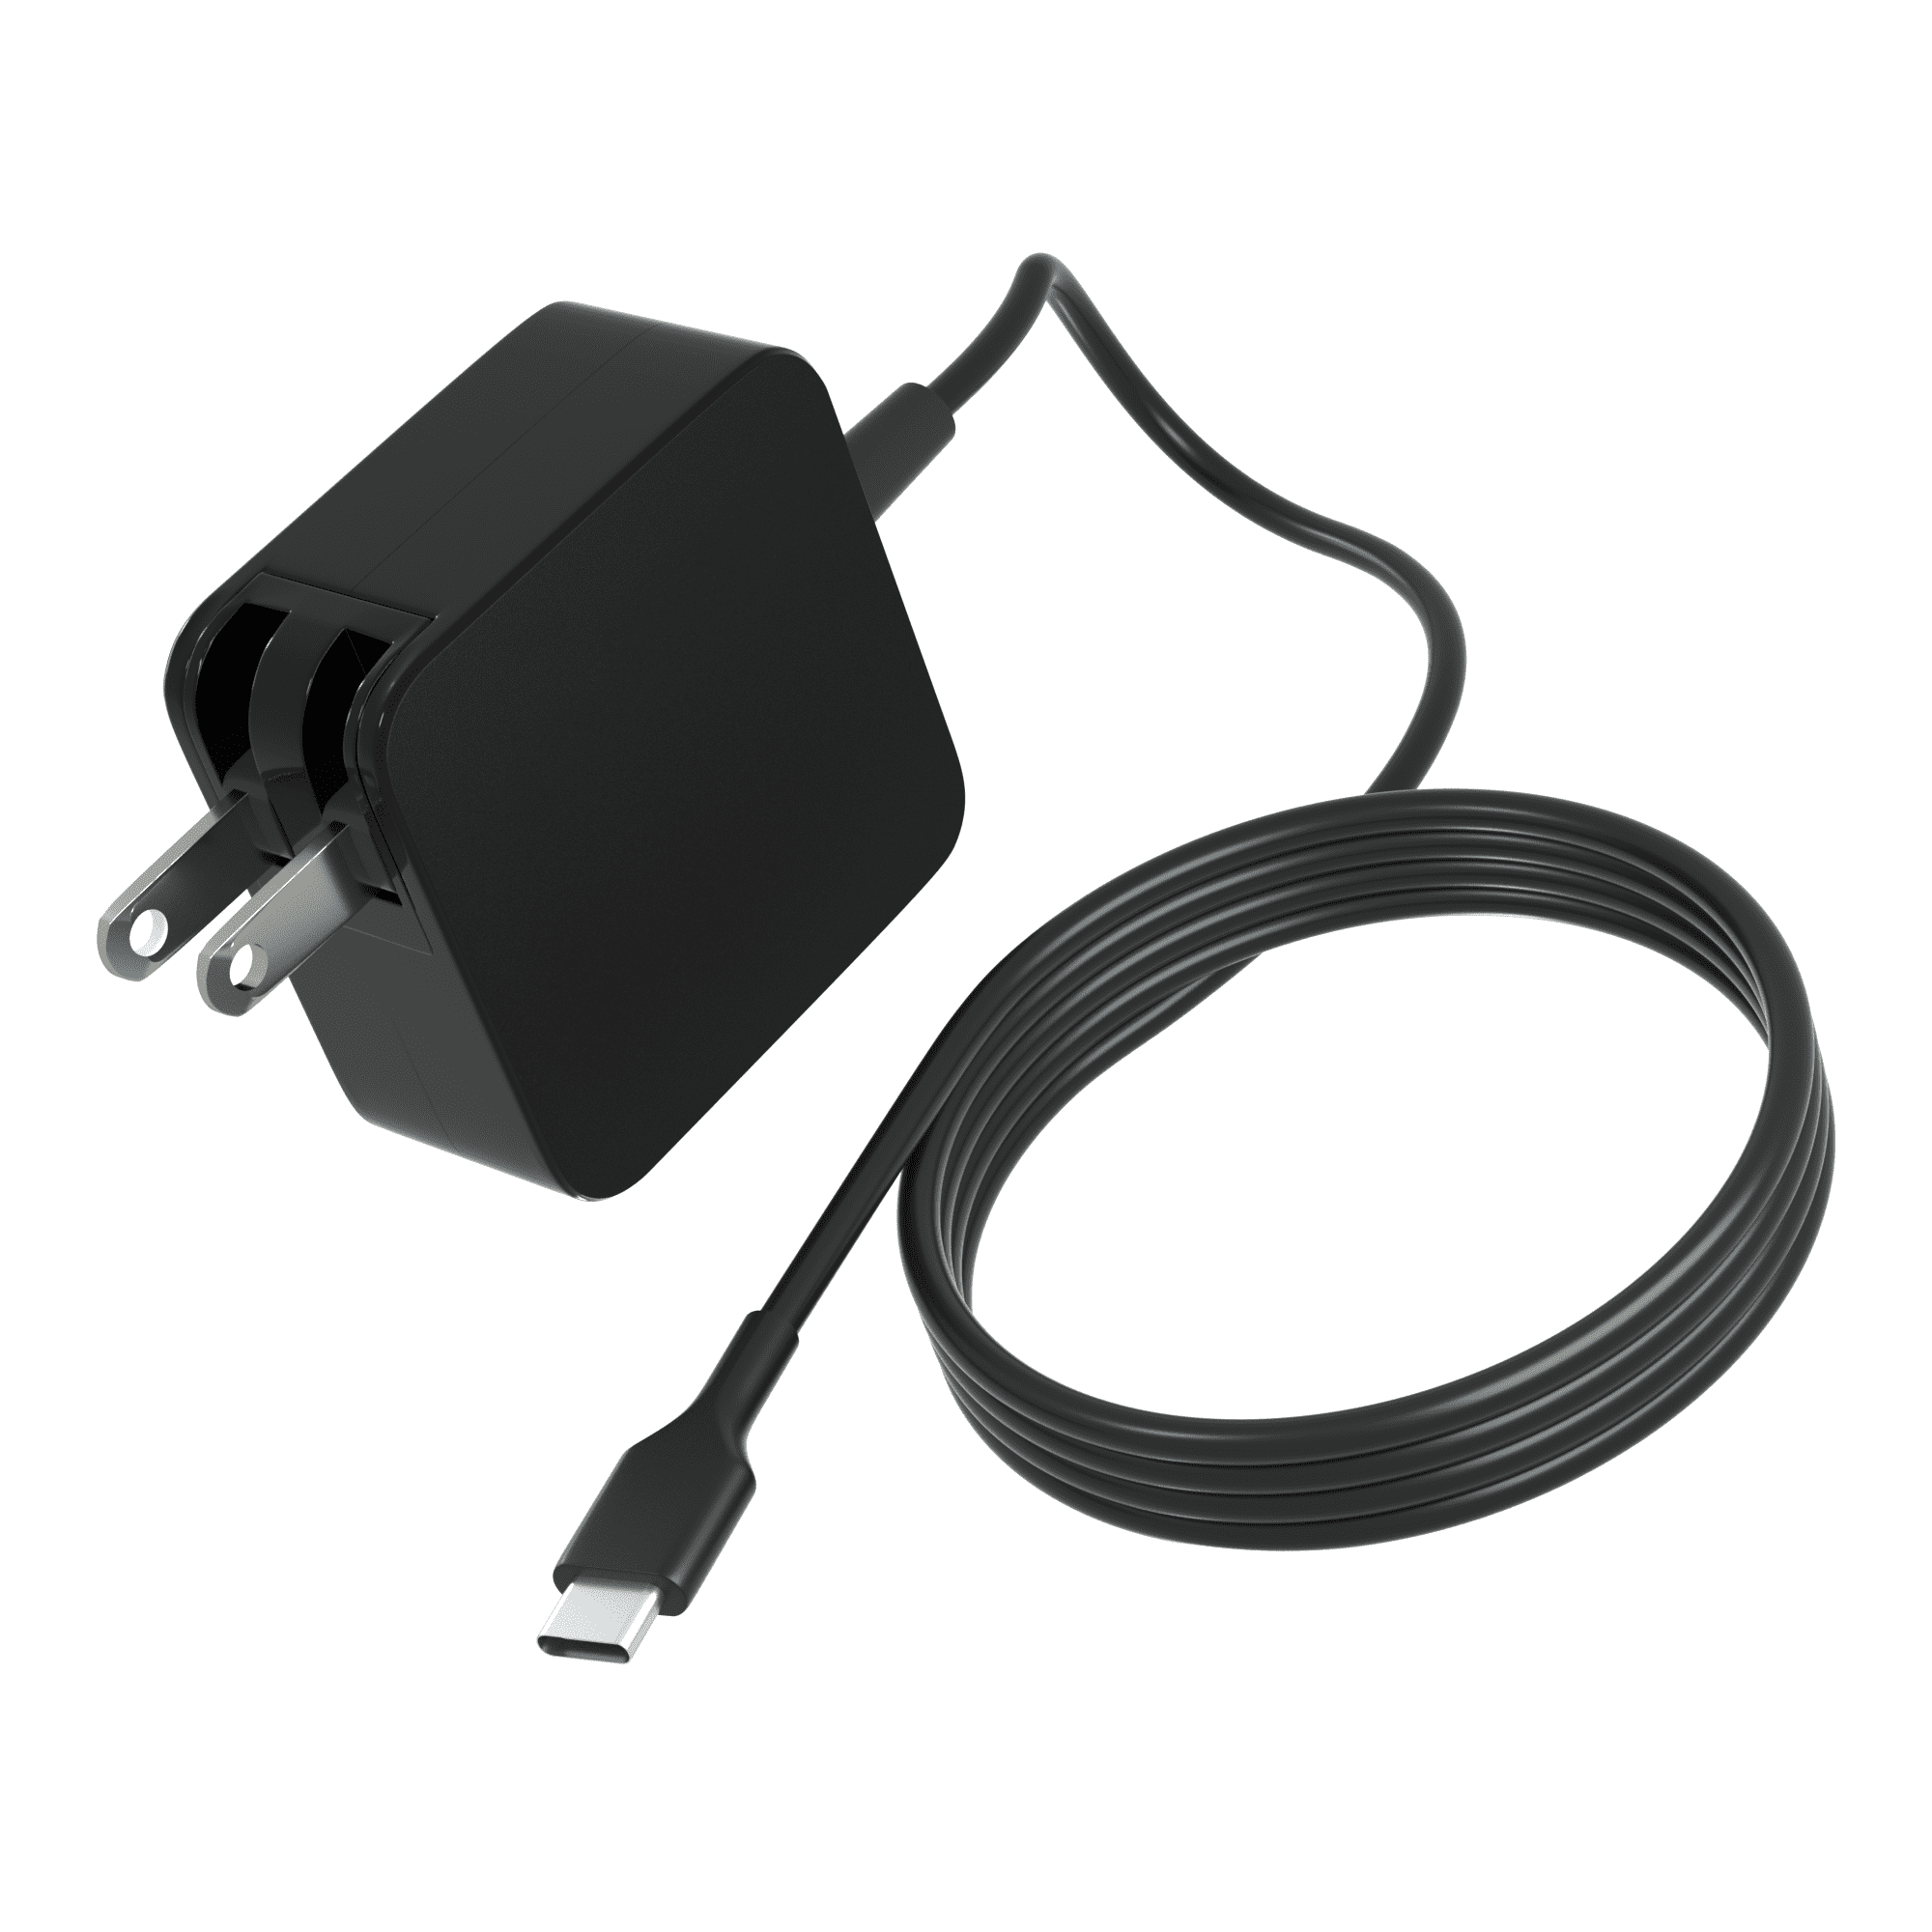 45W Type C AC Charger Fit for Asus Chromebook C523 C523N C523NA C223 C223N C223NA C423NA C423N C423 14 C425TA C425T C425 Q325 Q325U Q325UA C523NA-DH02 ADP-45EW B Laptop Power Supply Adapter Cord 